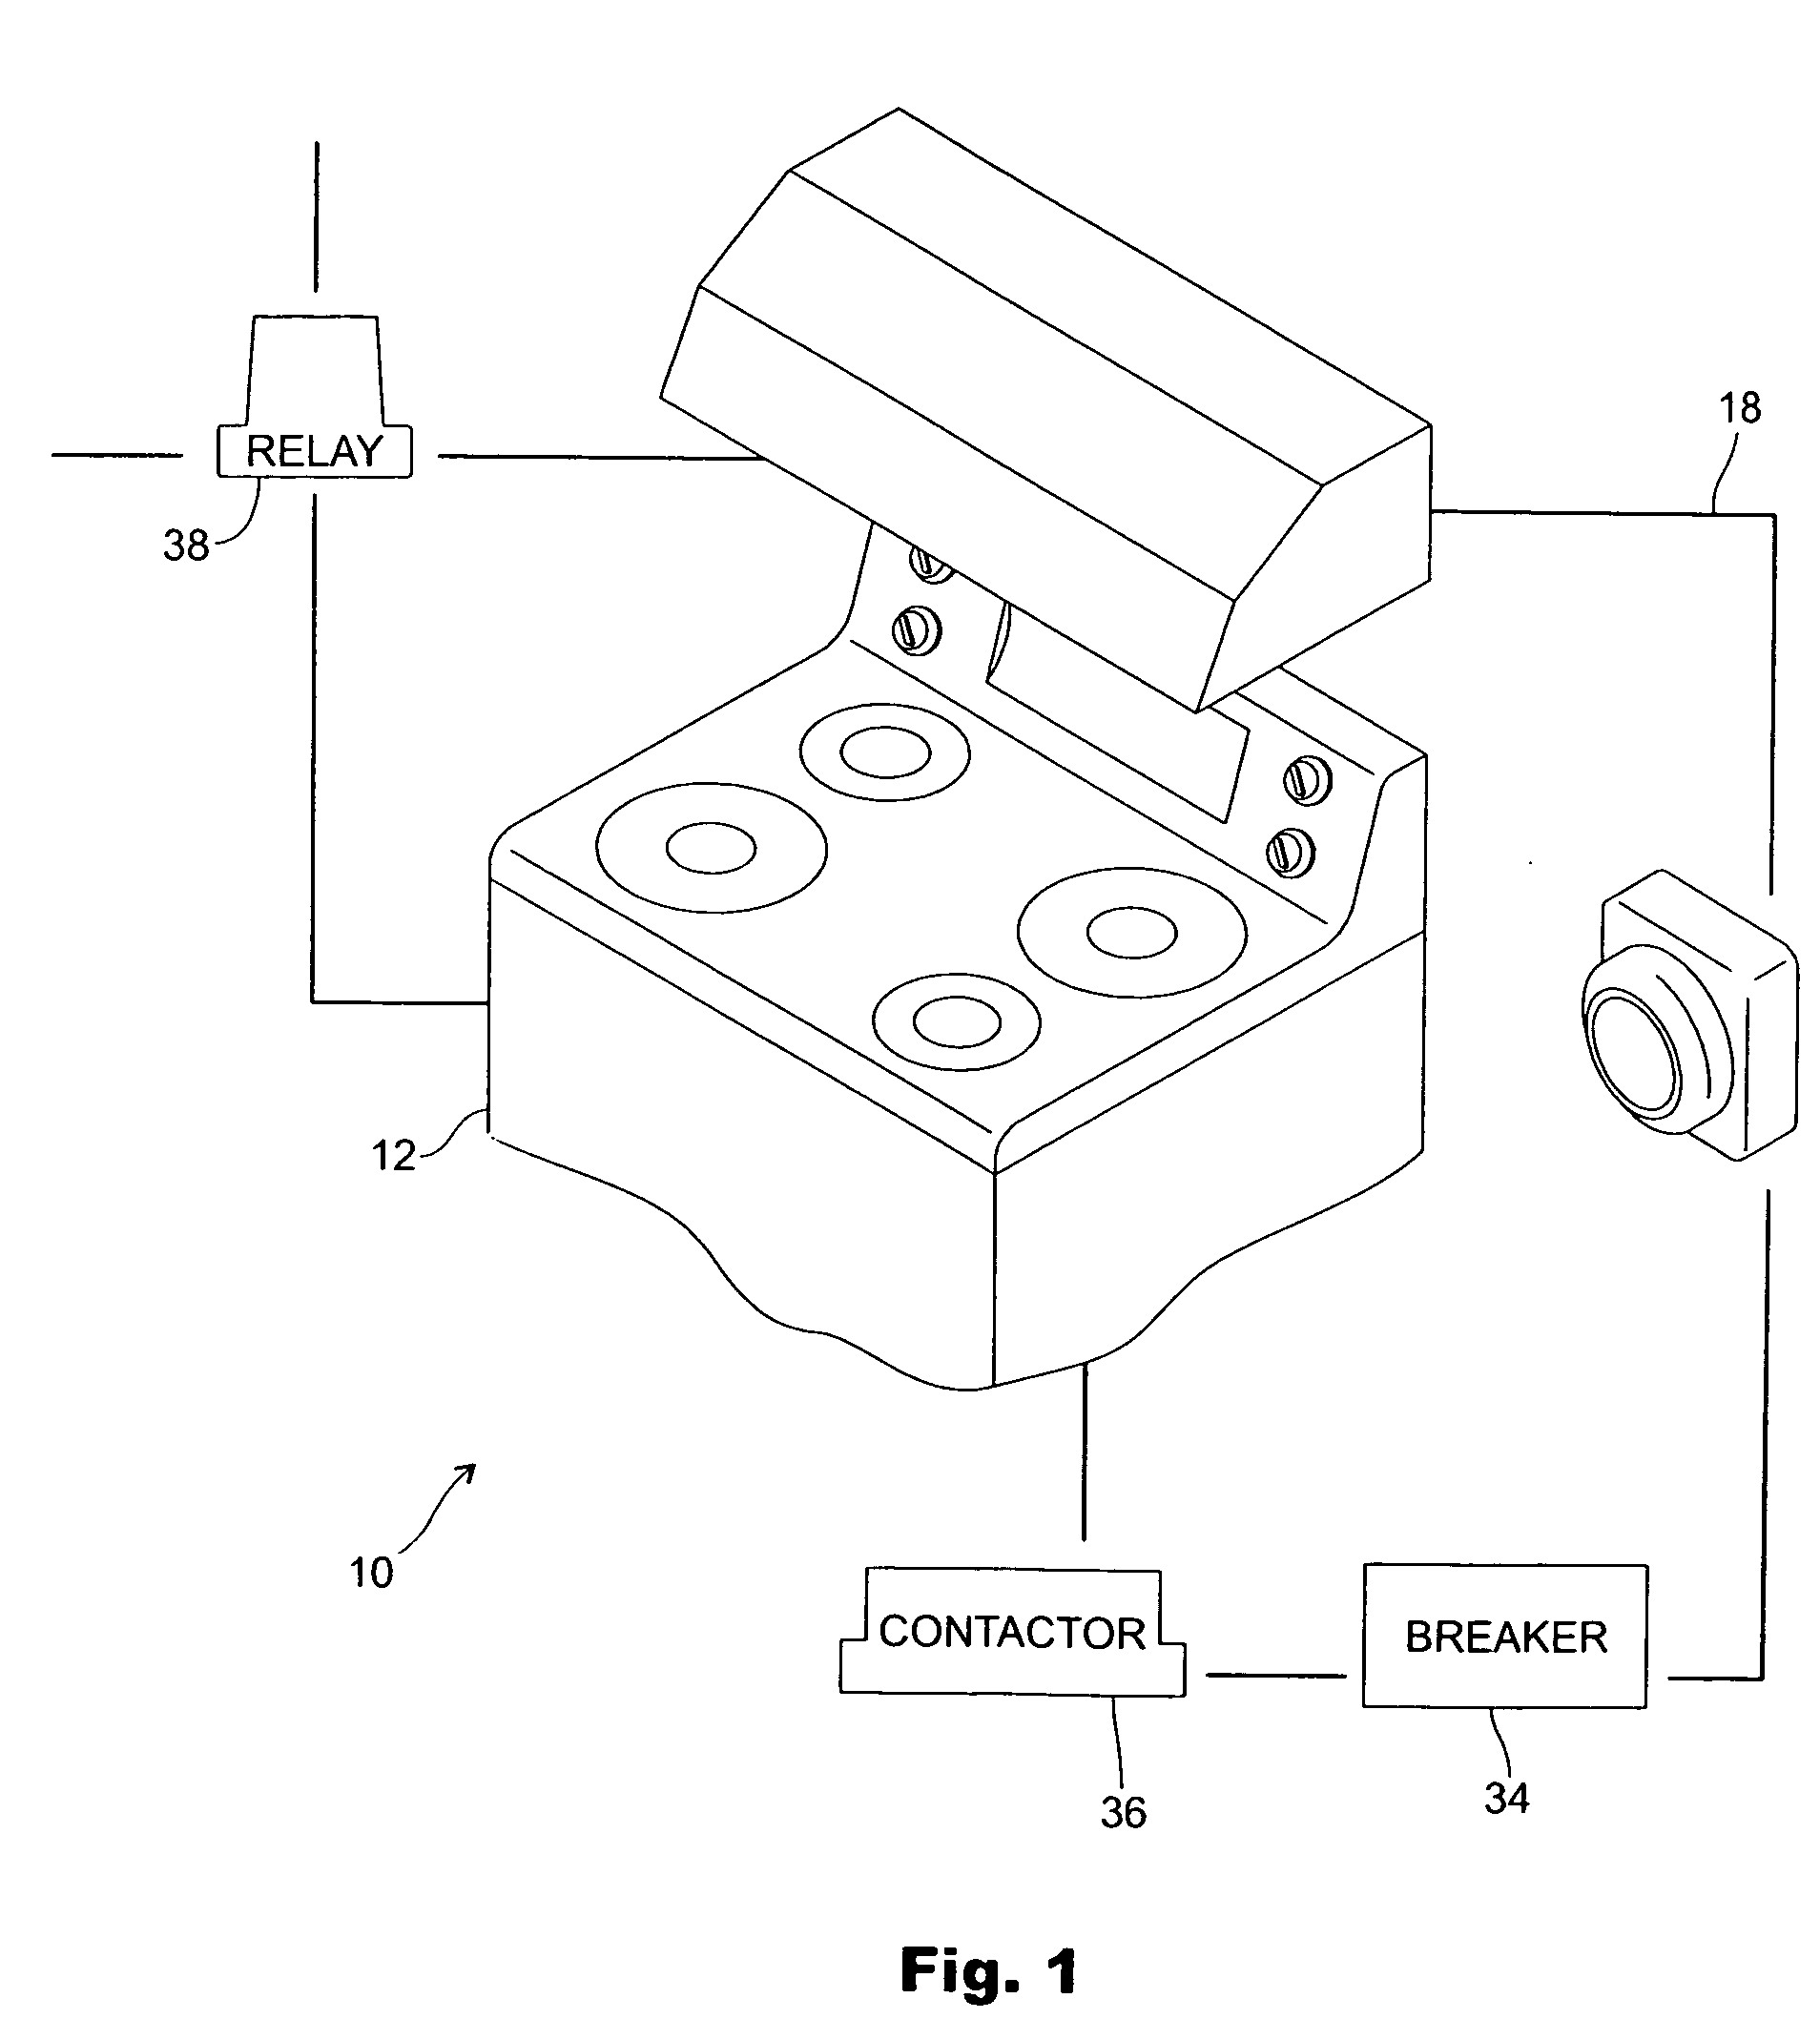 Safety shut off system for household appliances